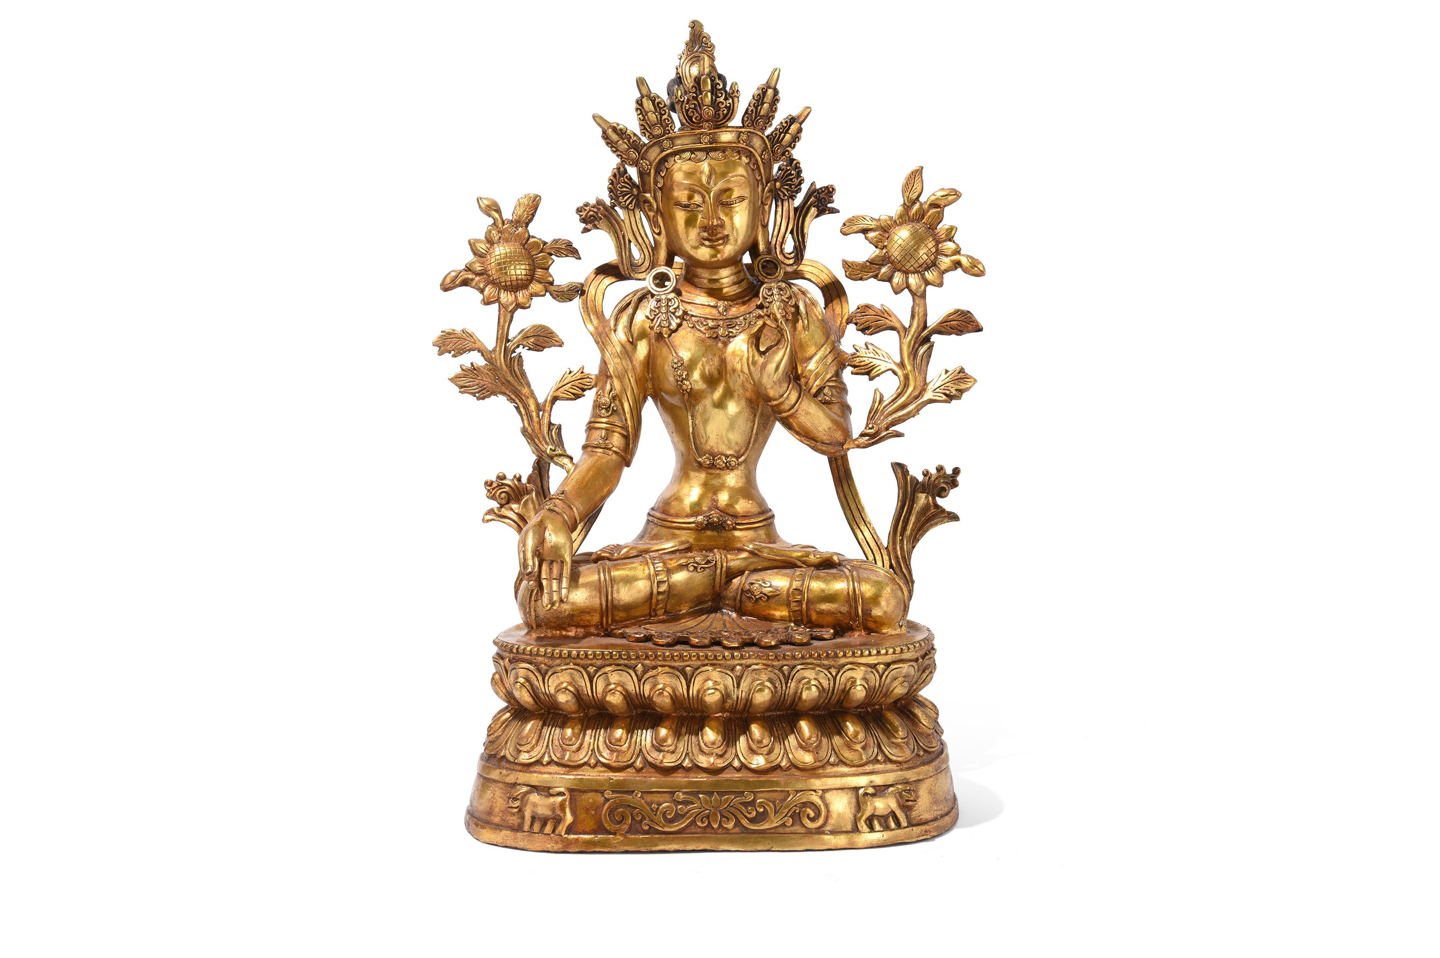 A statue of the Tibetan goddess Tara in Gilt Bronze. Tara, known as Jetsun Dolma in Tibetan Buddhism, is a female Bodhisattva in Mahayana Buddhism. Known as the mother of liberation, she represents the virtues of success in work and achievements. Tara is also known as Tara Bosatsu in Japan and occasionally as Duoluo Pusa in Chinese Buddhism.